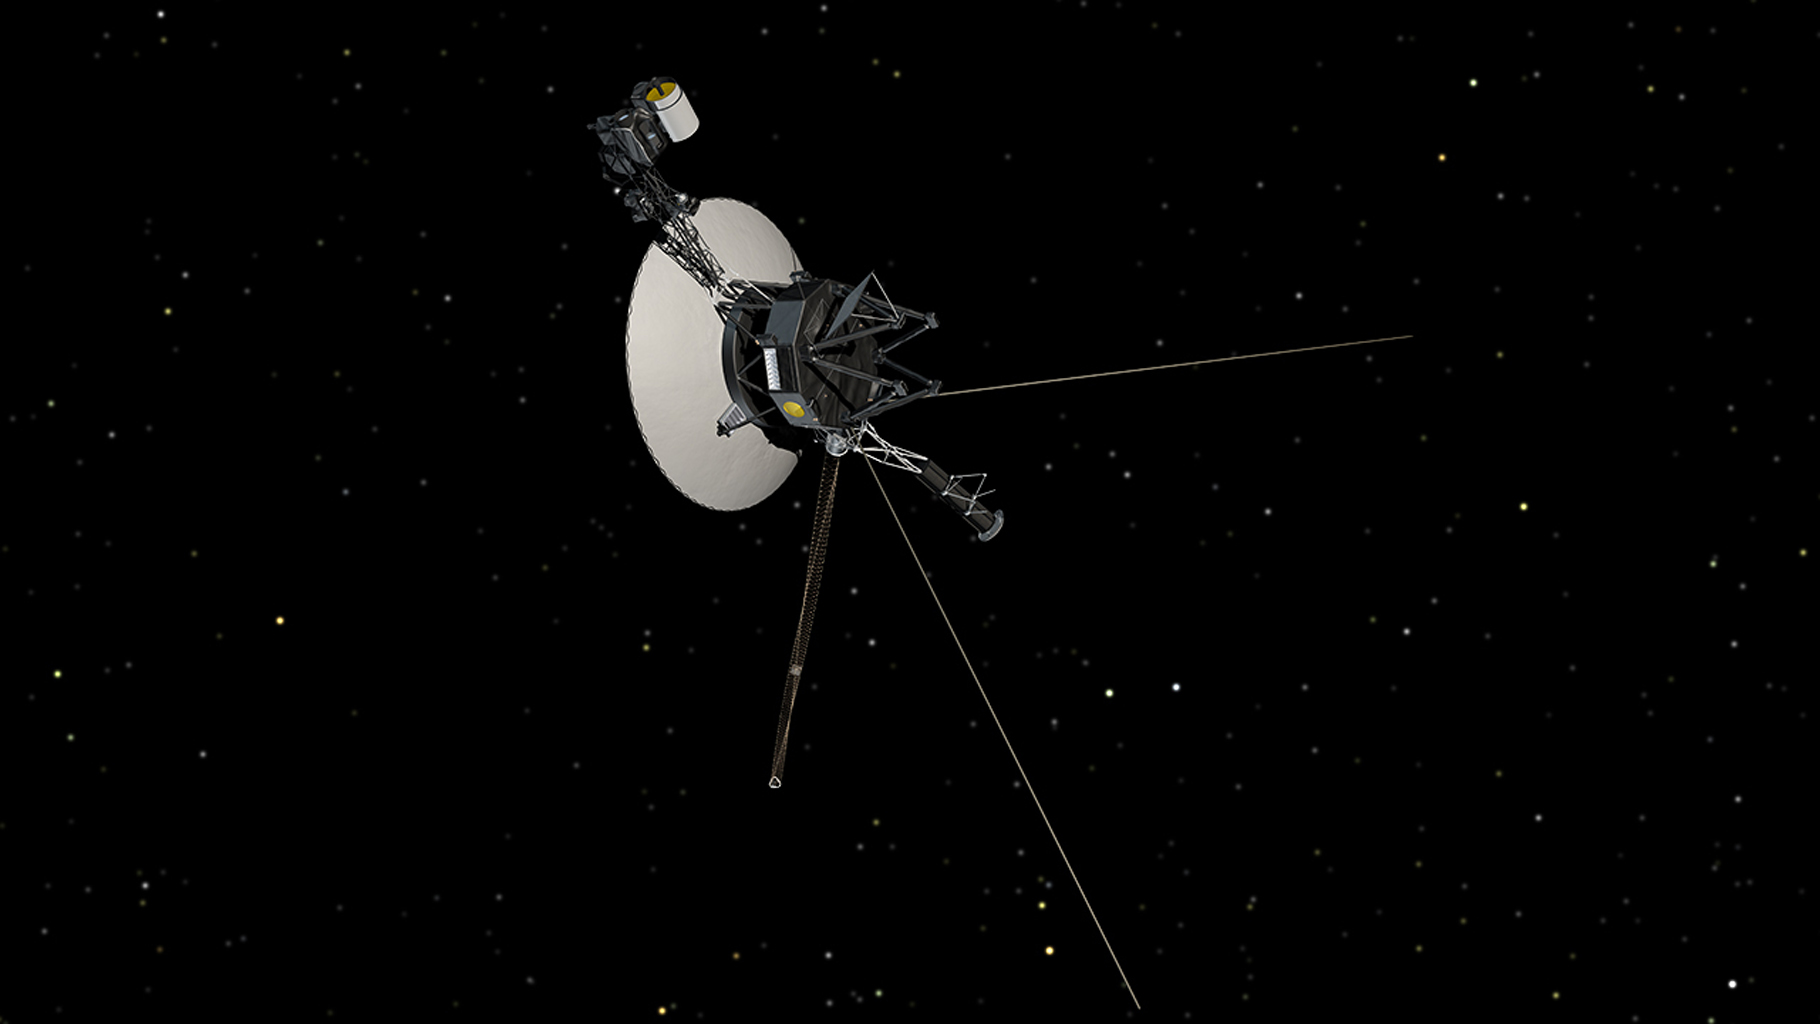 slide 3 - This artist’s concept shows NASA’s Voyager spacecraft against a backdrop of stars.